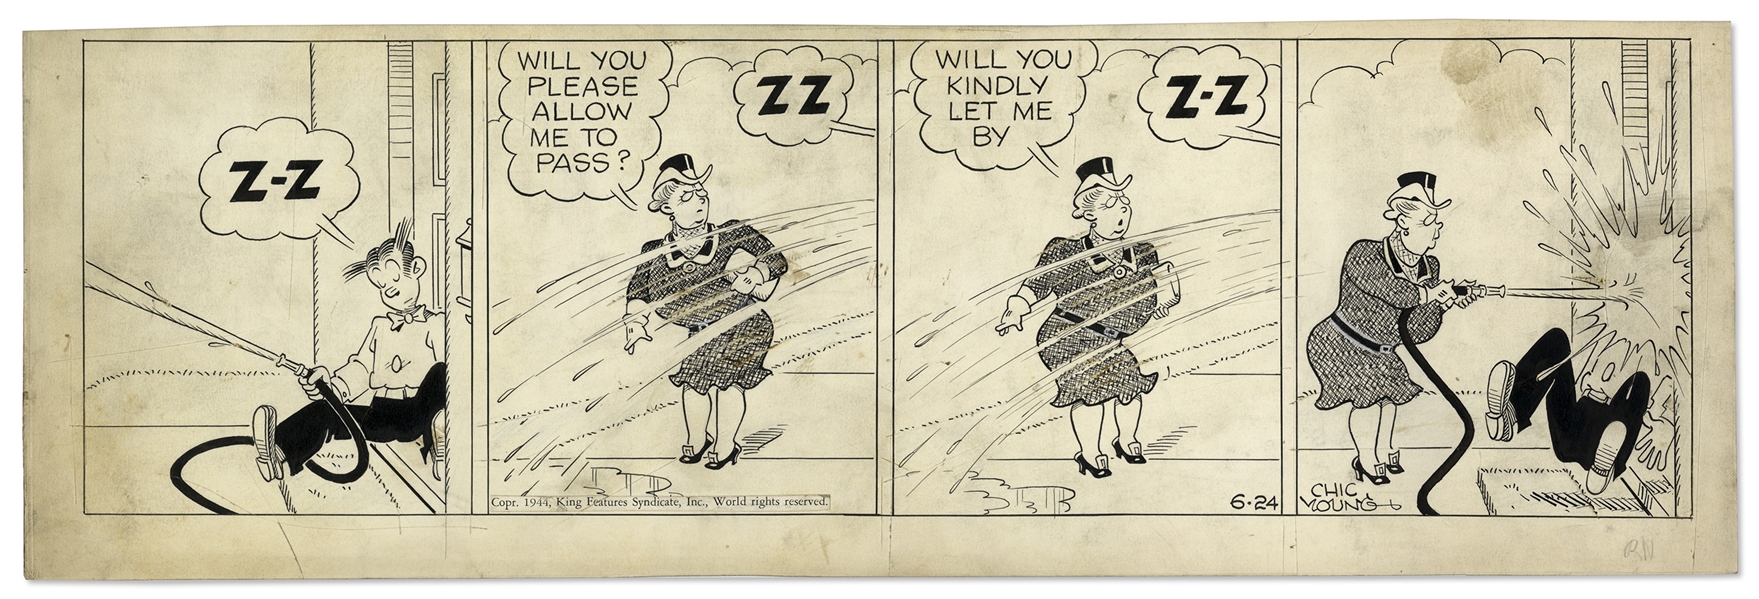 Chic Young Hand-Drawn ''Blondie'' Comic Strip From 1944 Titled ''Local Showers In The Suburbs!''